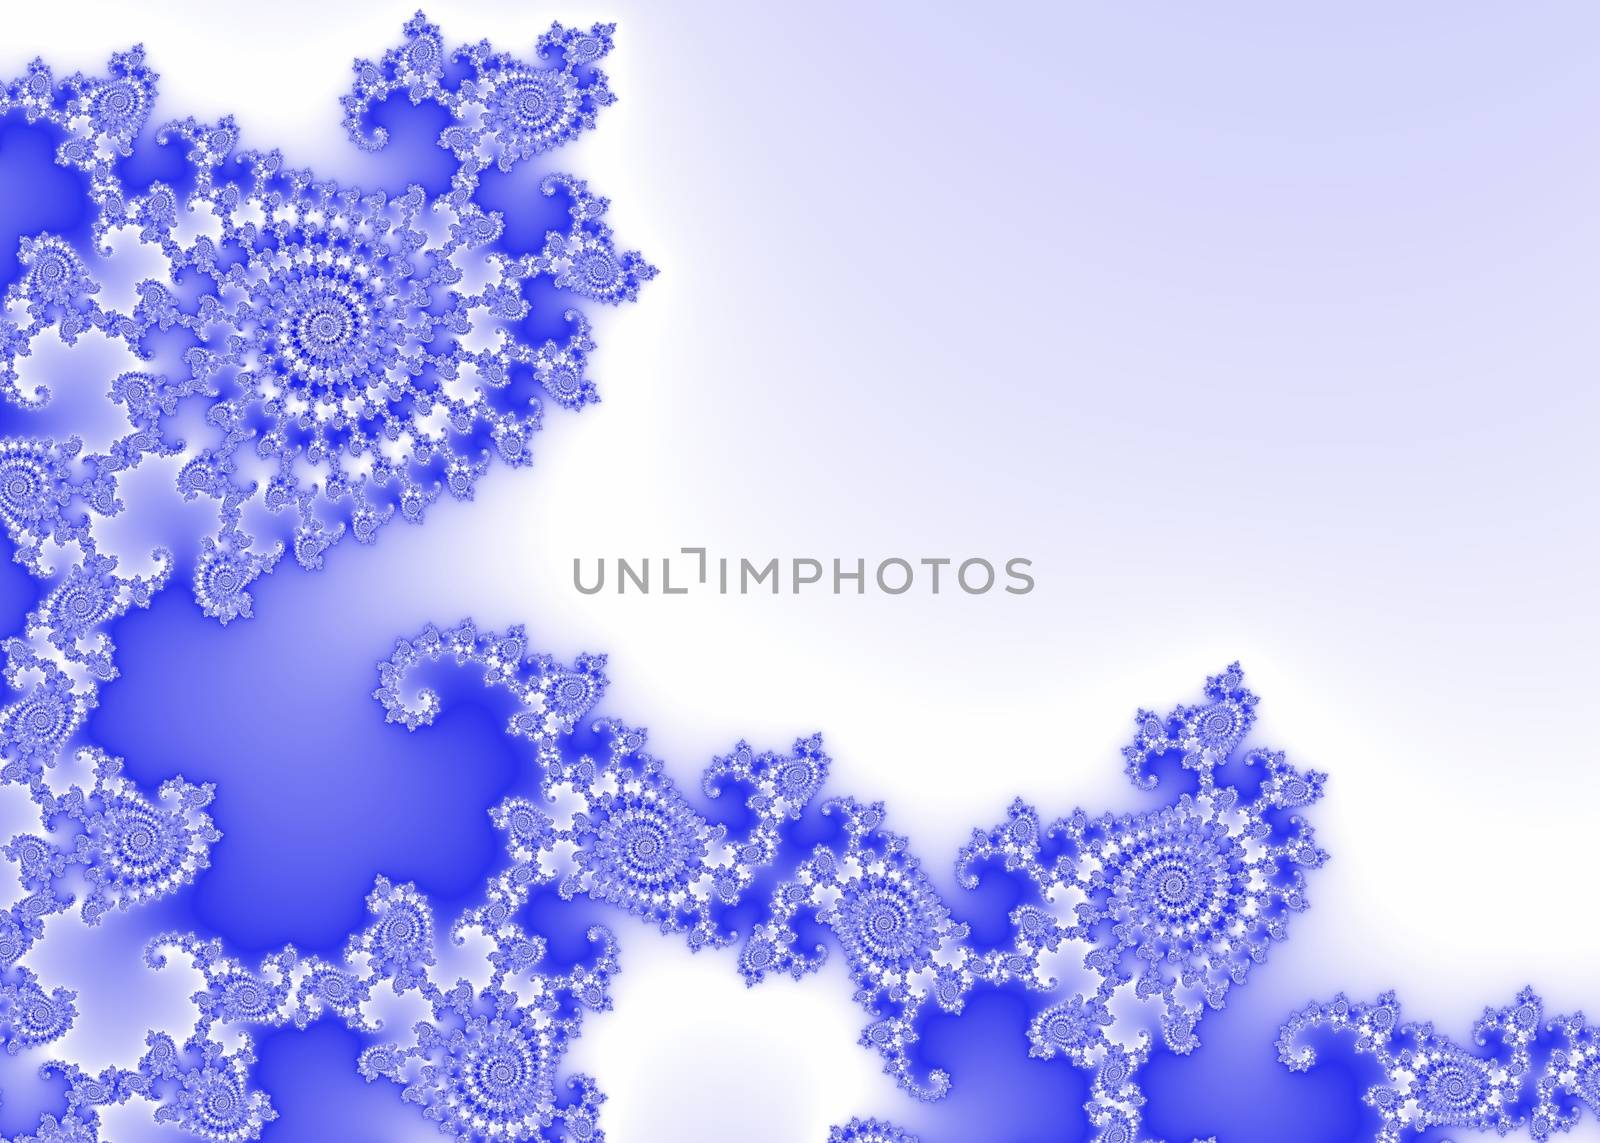 Blue Decorative Fractal Background with Spiral Reliefs - Abstract Image for Your Graphic Design